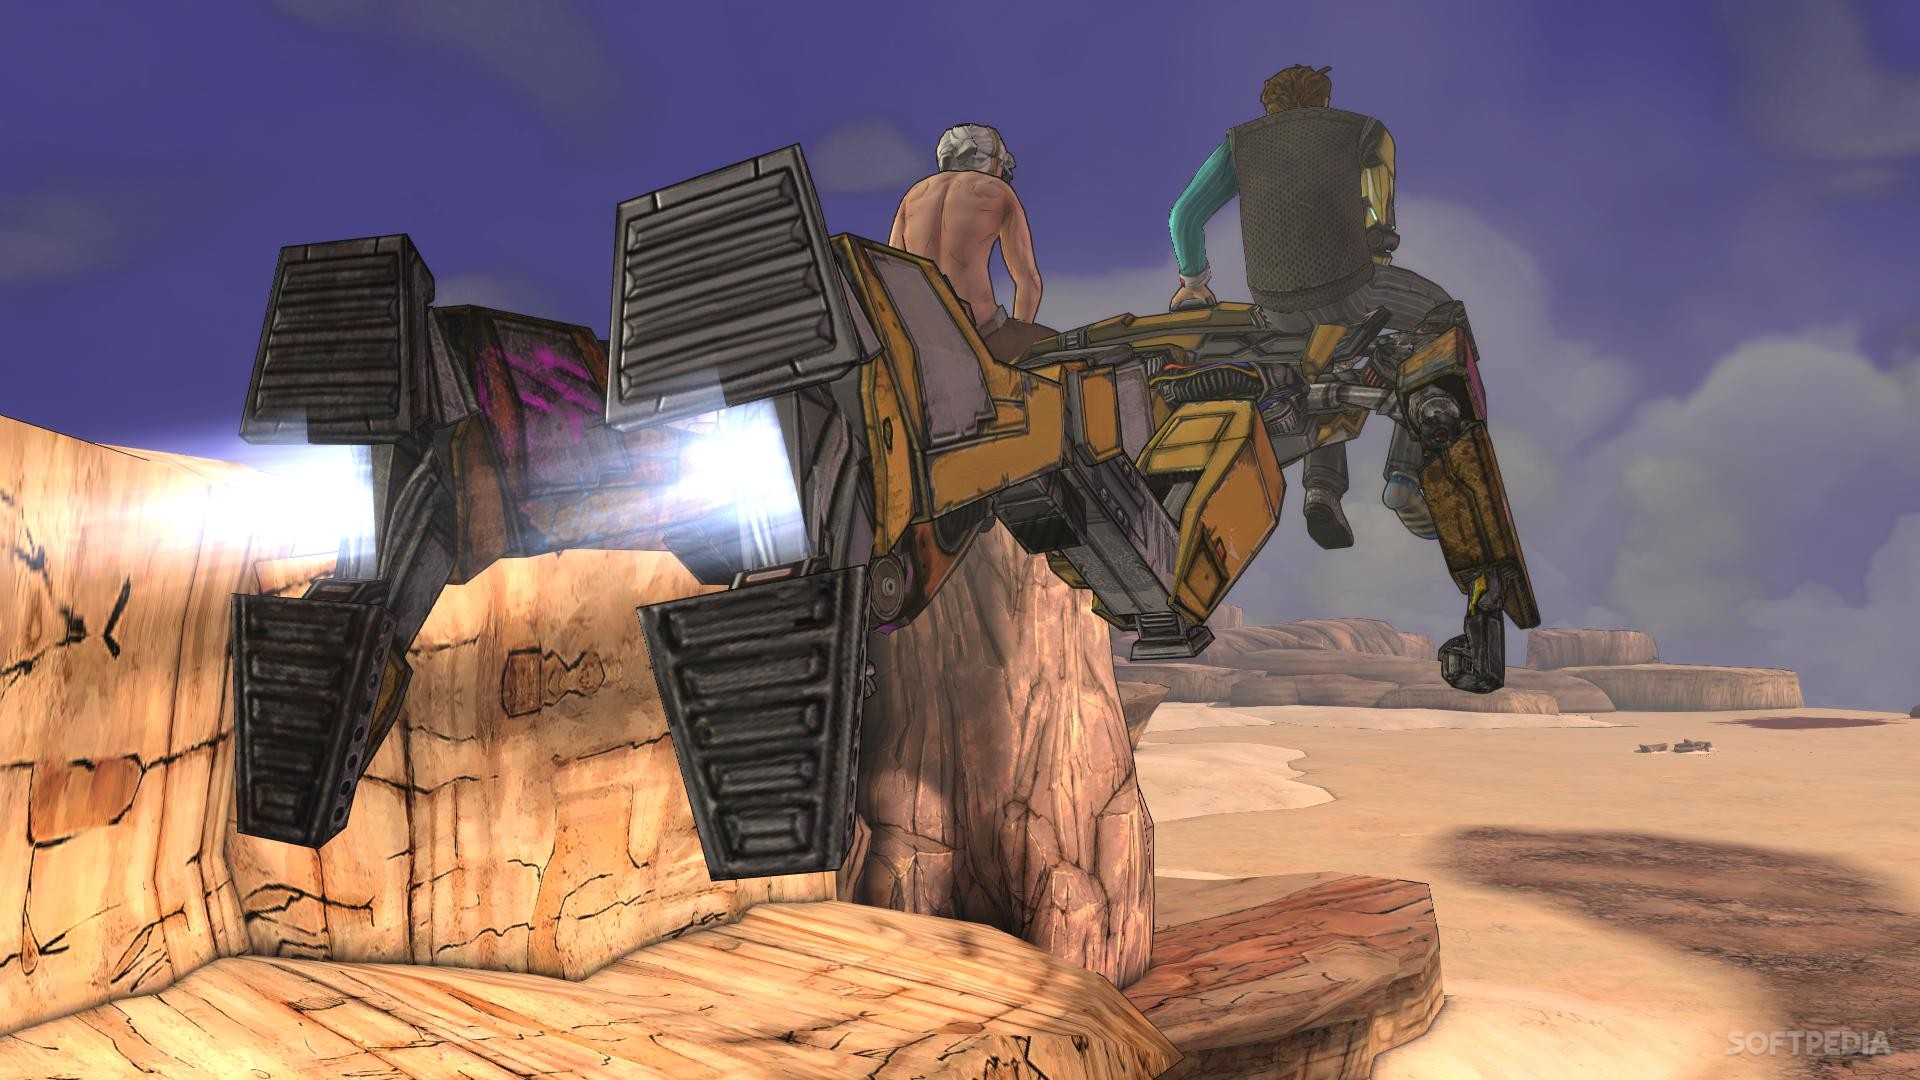 Loader bot to the rescue in Tales from the Borderlands